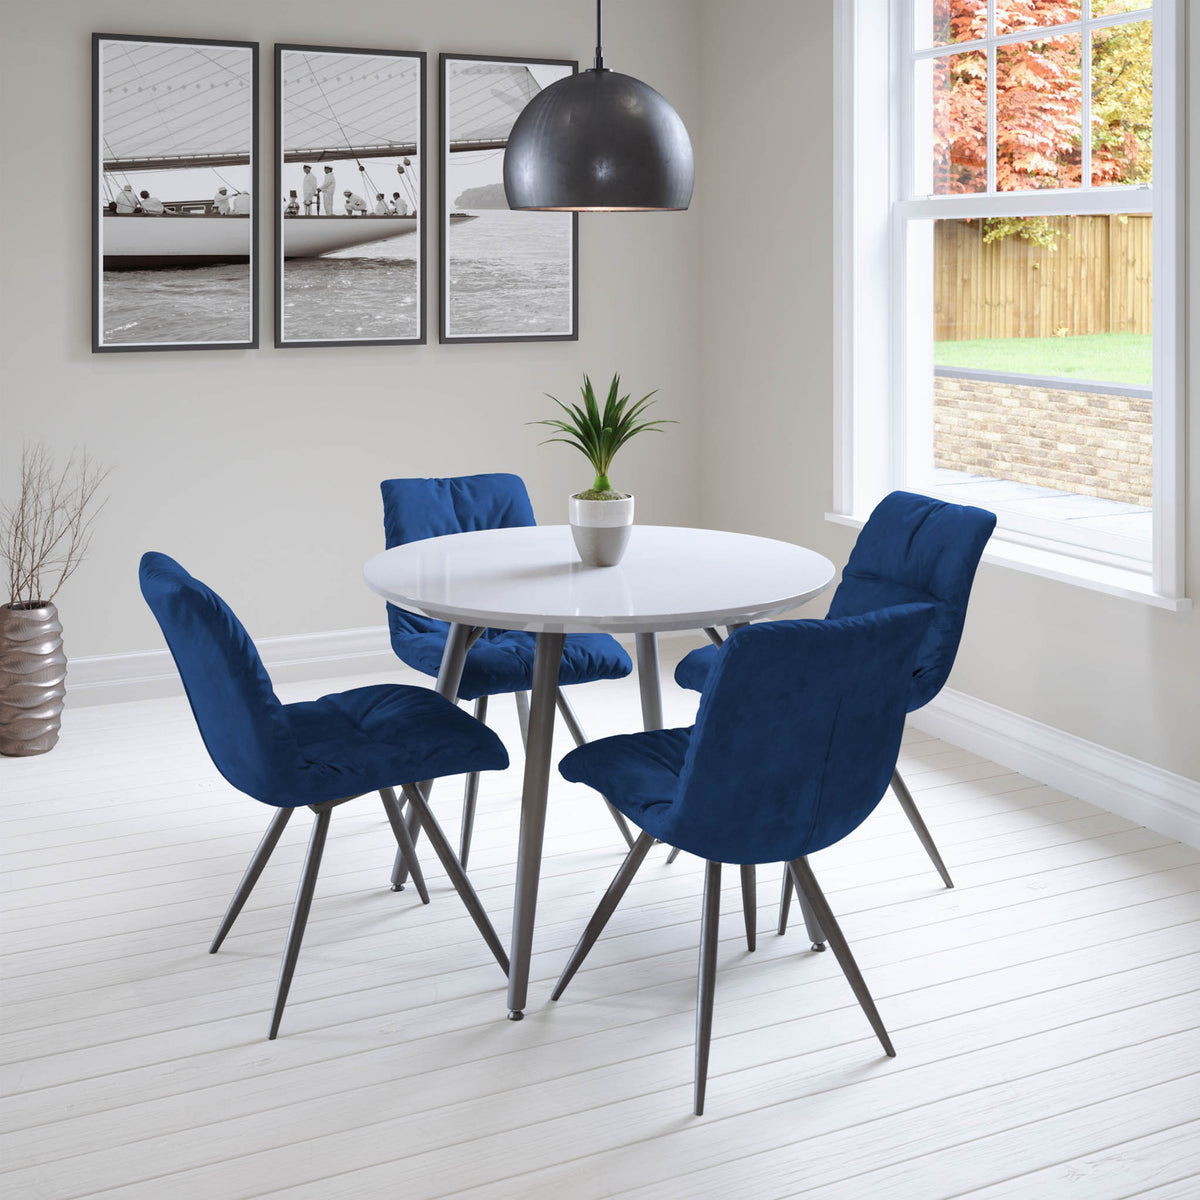 Paros Round Dining Table with 4 Addison Blue Chairs